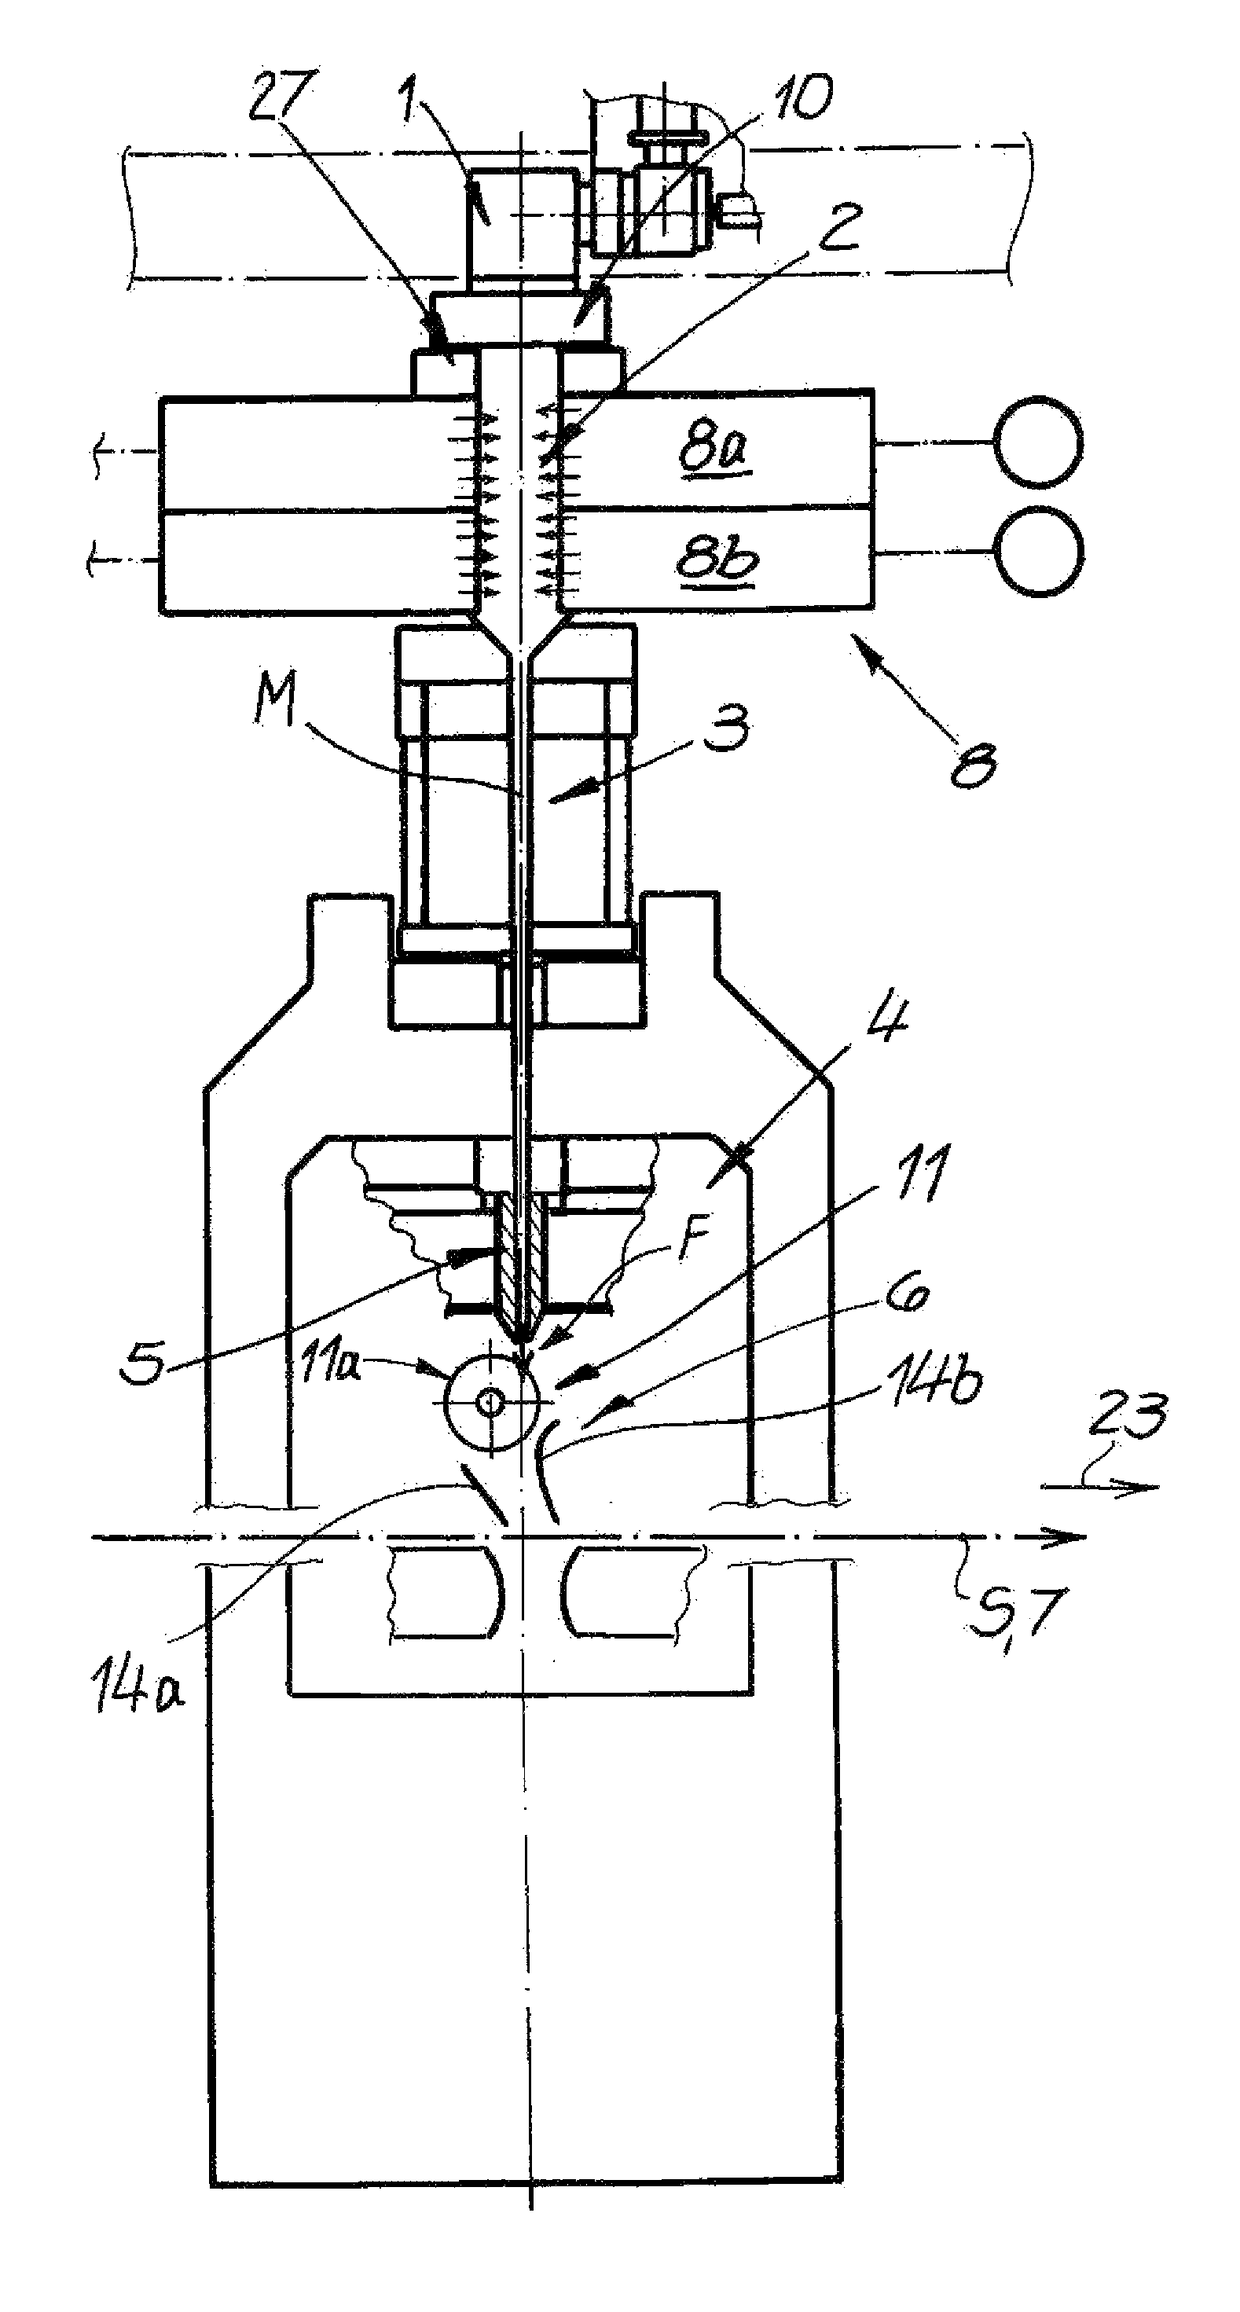 Apparatus for the continuous manufacture of a spunbond web